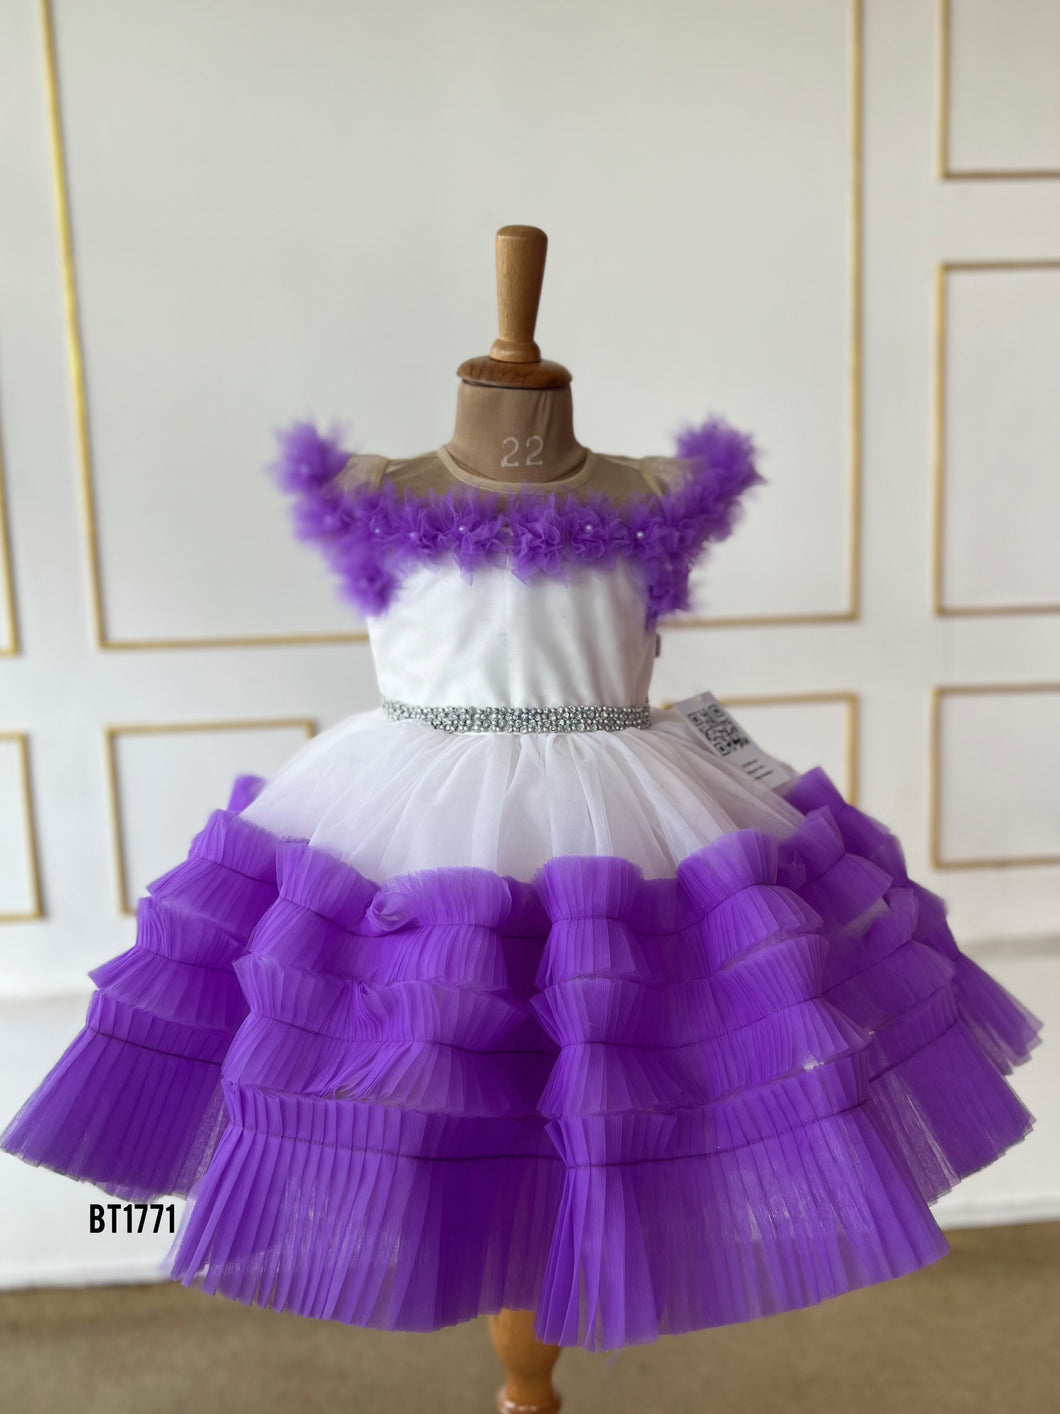 BT1771 Lilac Fairy Tale Ruffle Dress for Little Charms